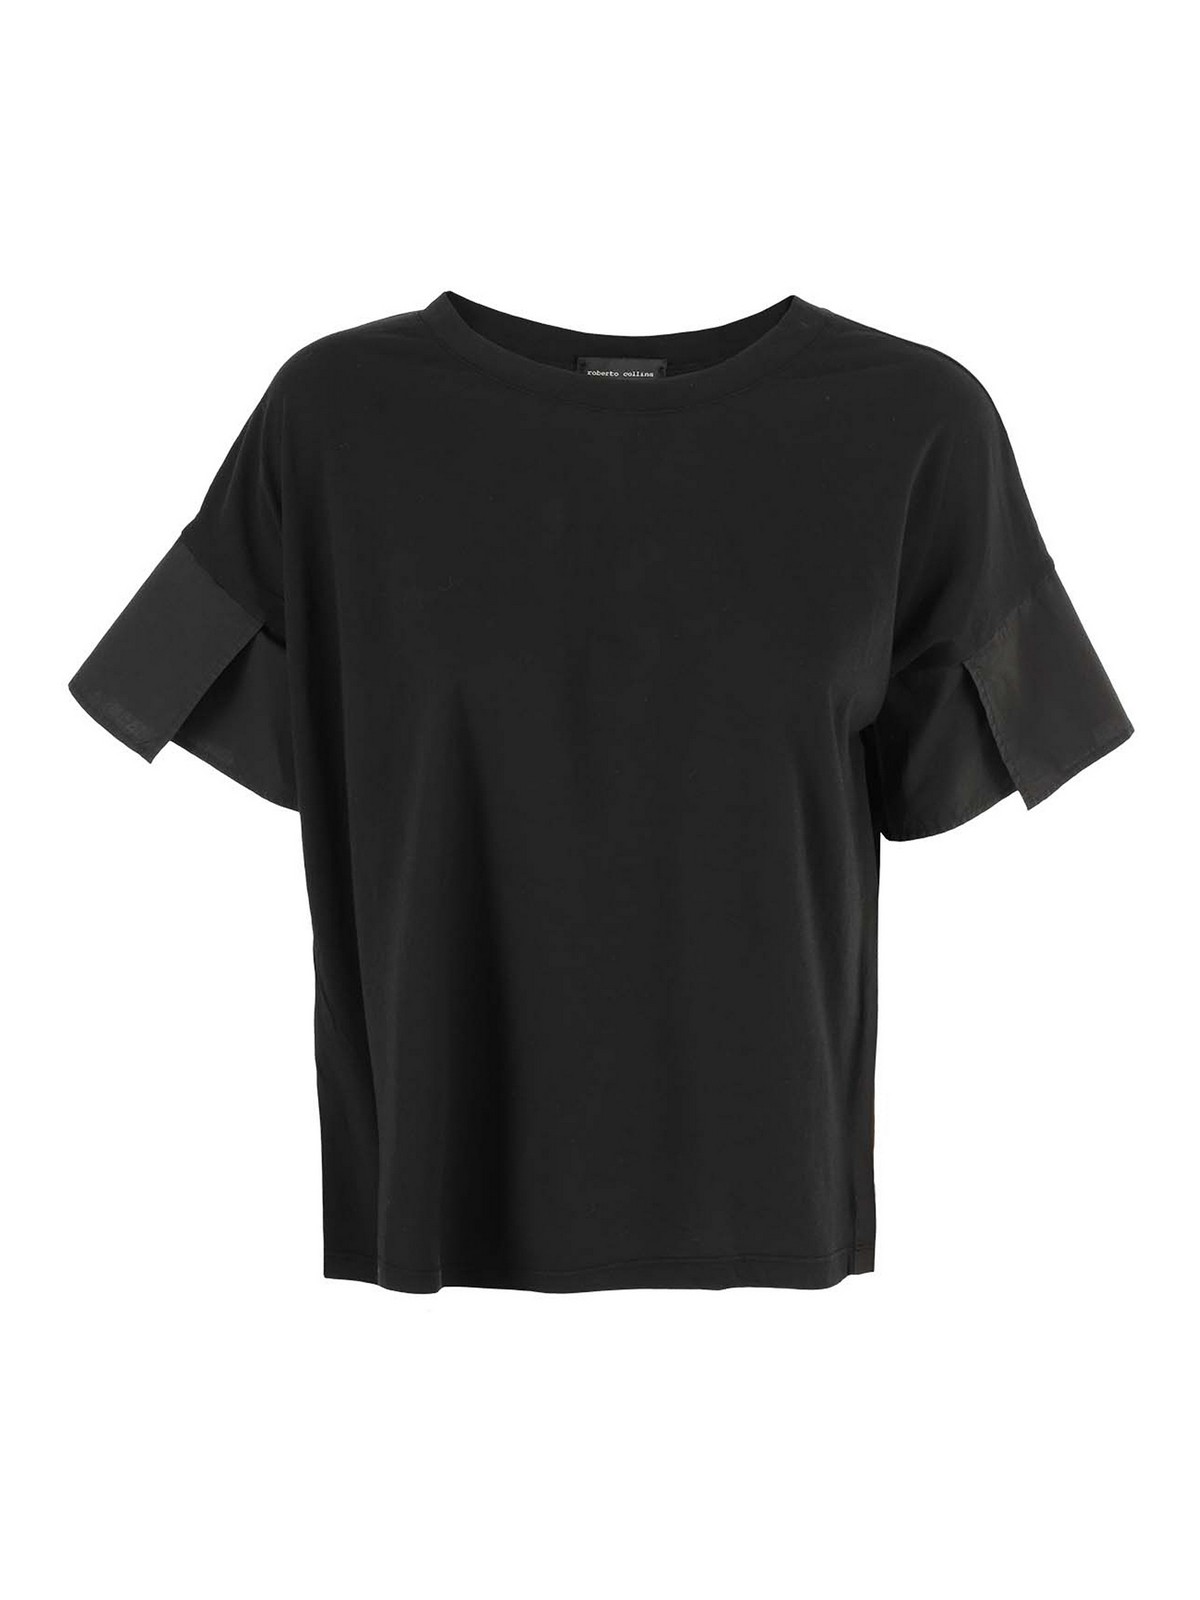 dressing gownRTO COLLINA COTTON JERSEY T-SHIRT